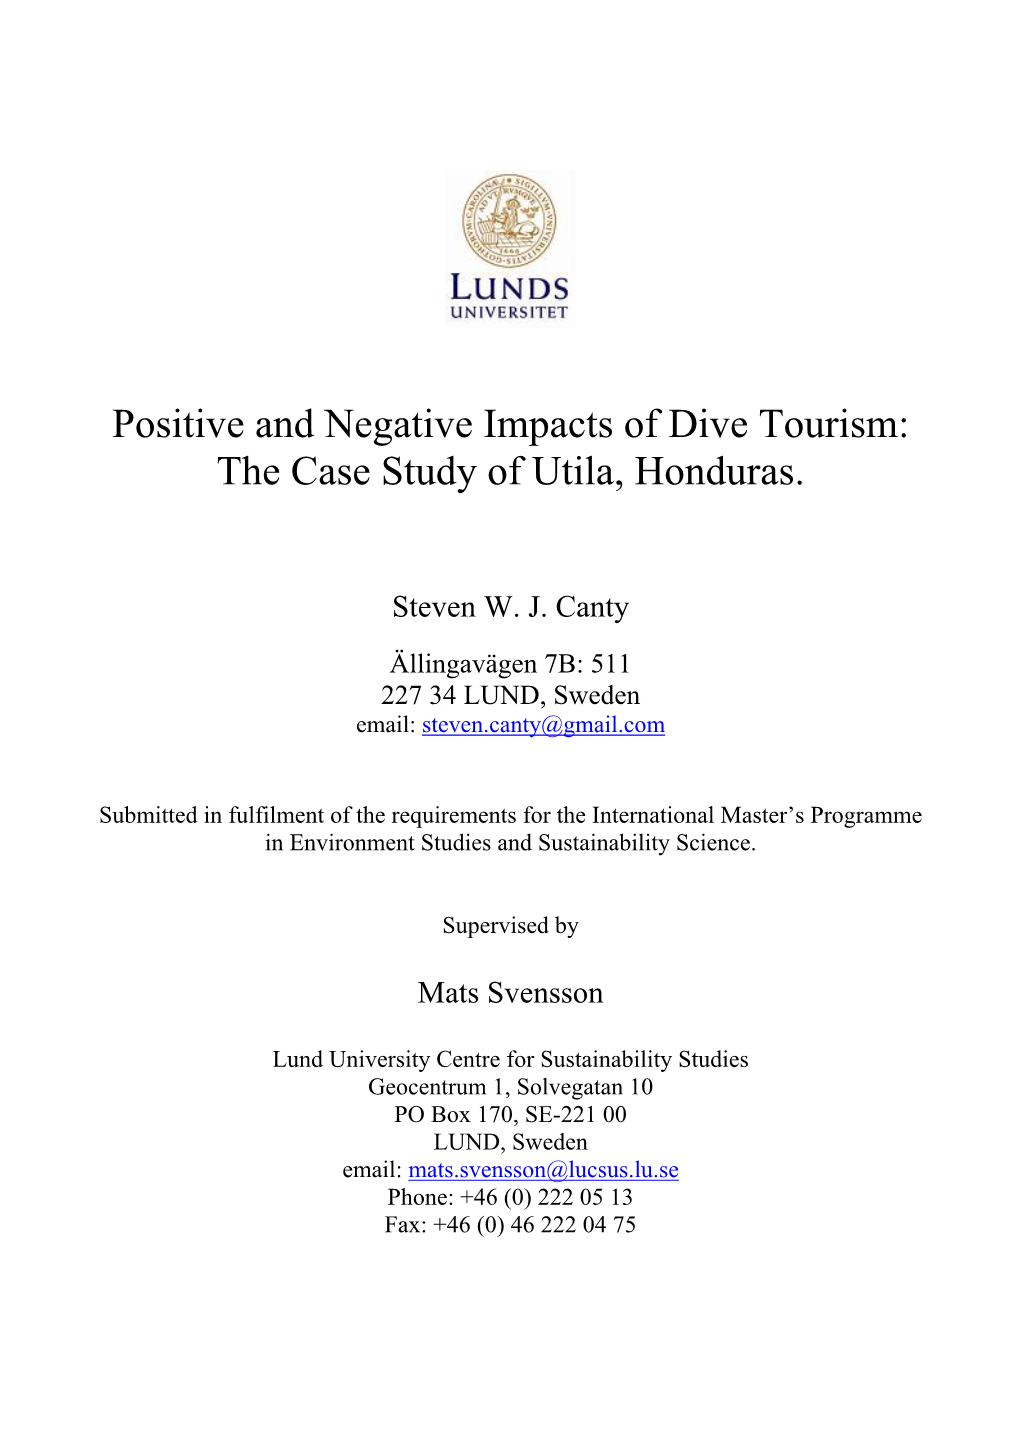 Positive and Negative Impacts of Dive Tourism: the Case Study of Utila, Honduras